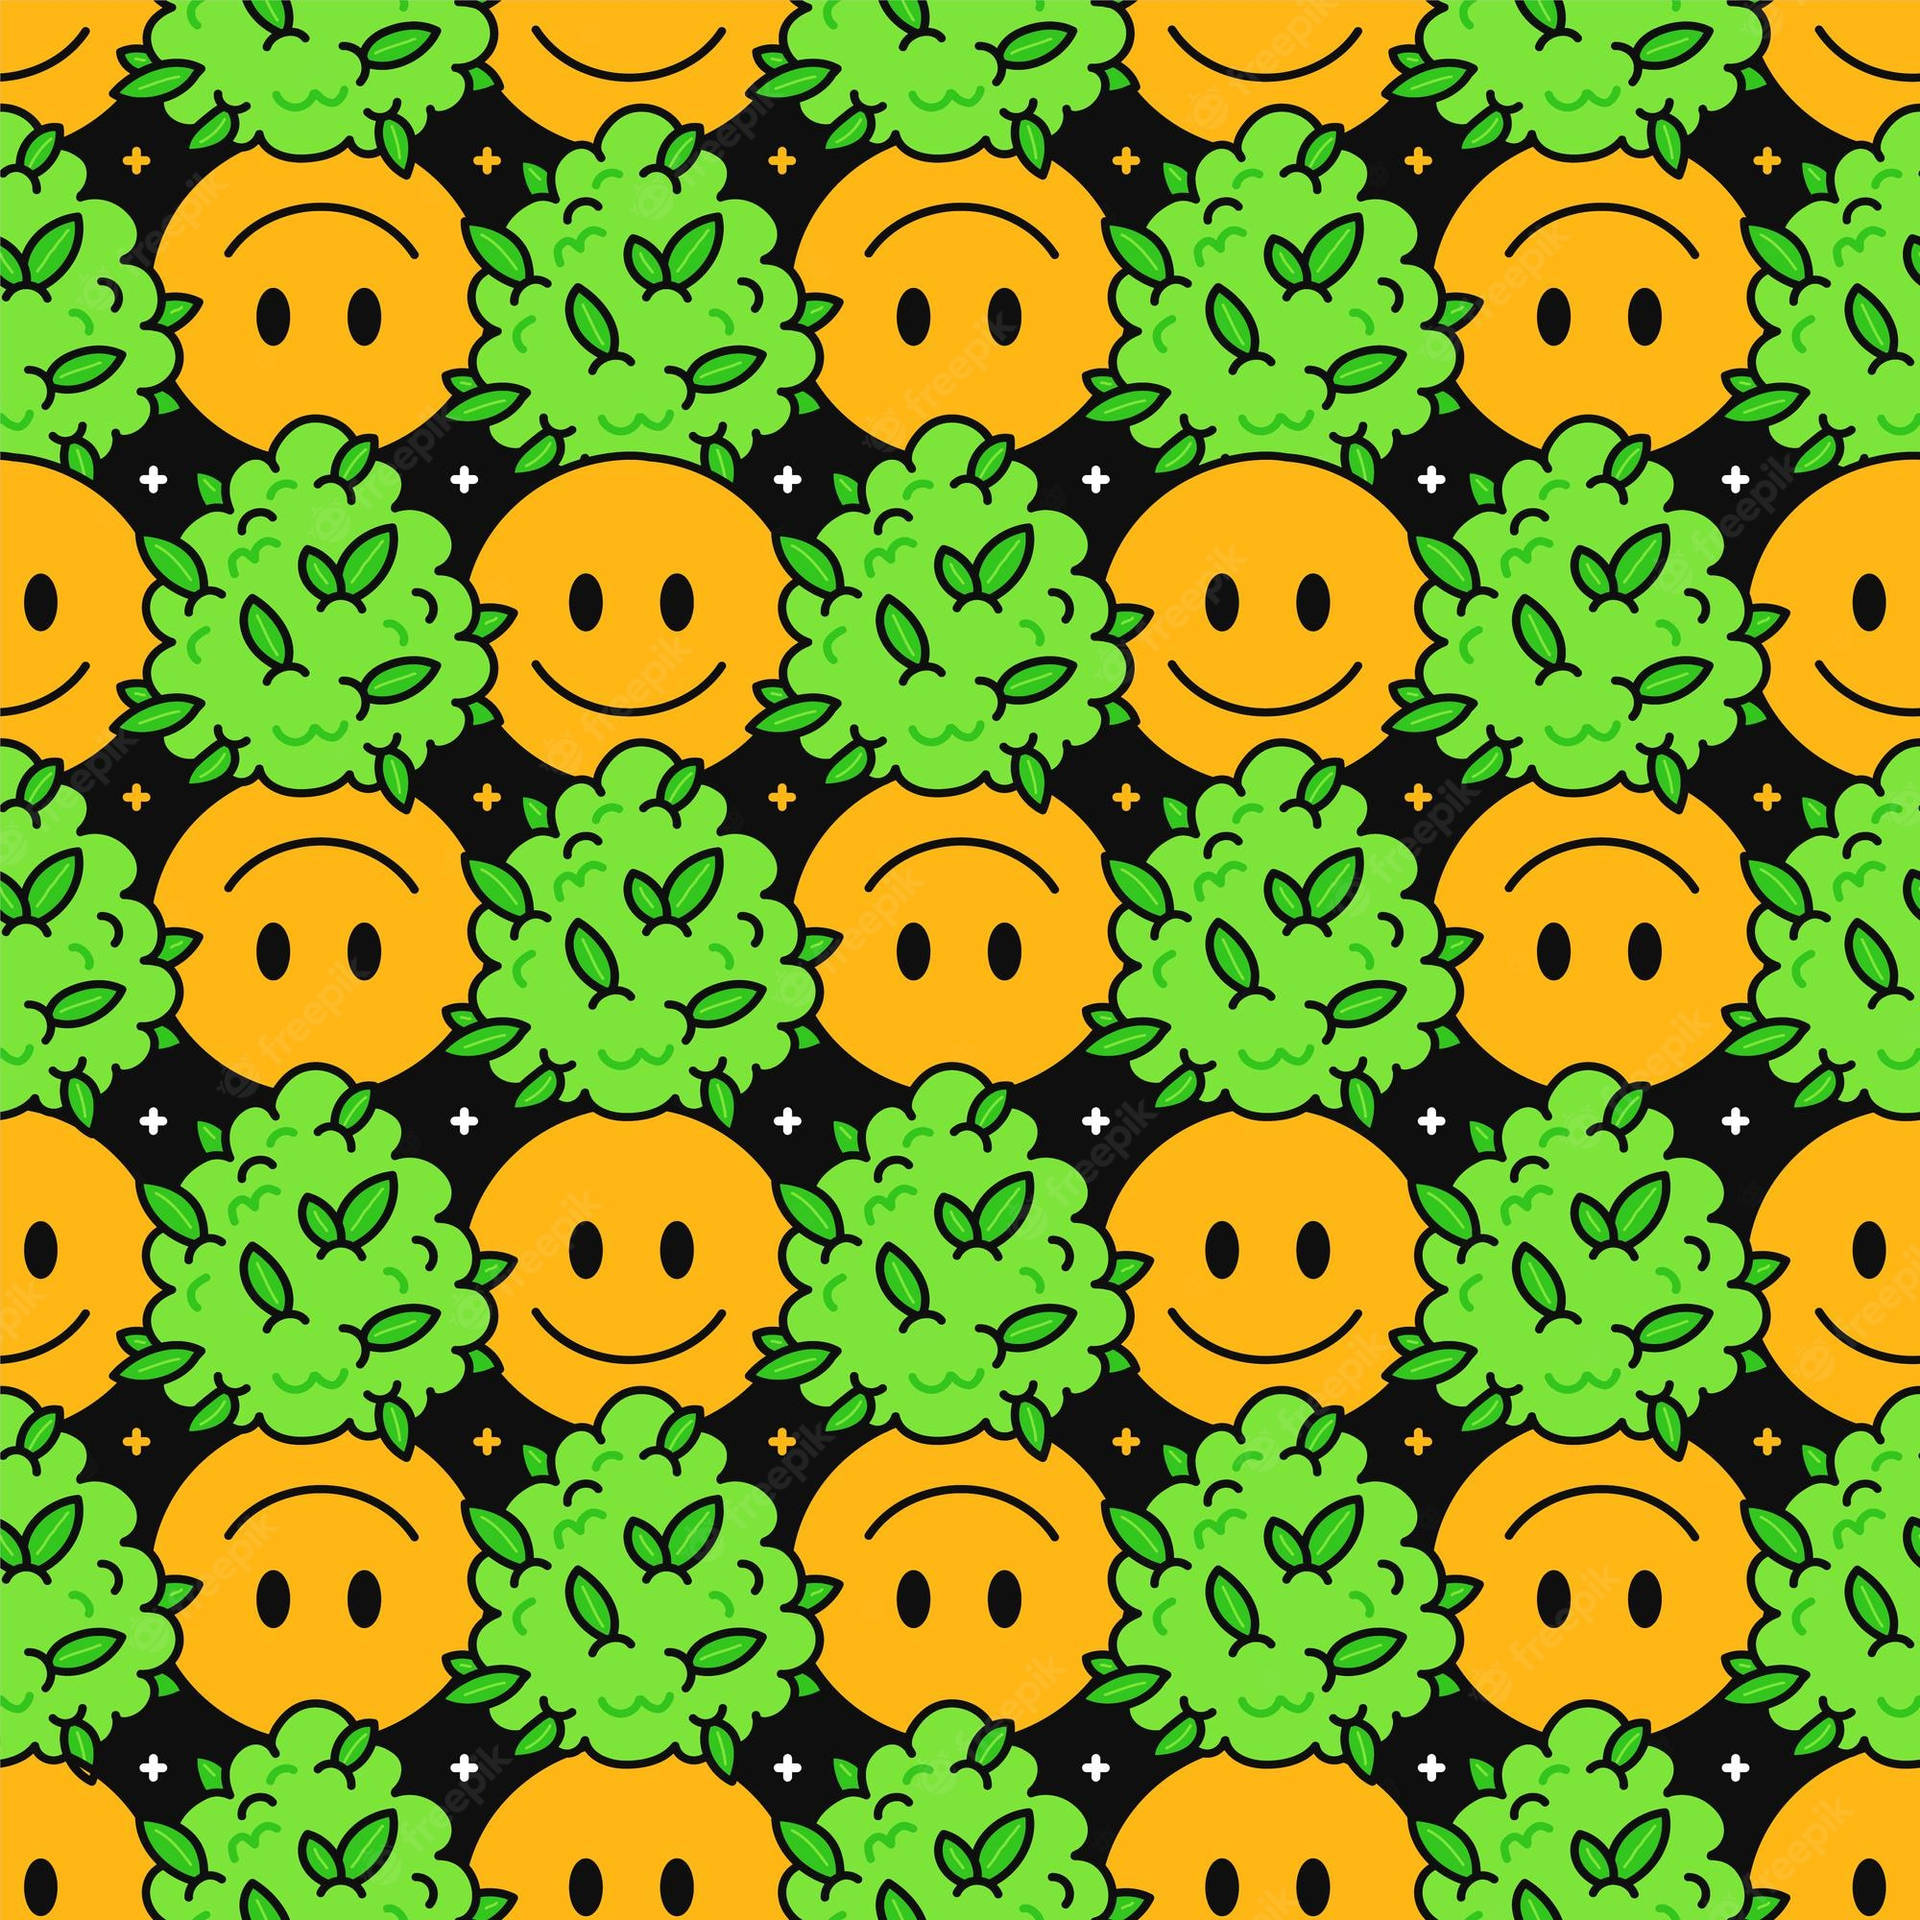 Funny Weed Smiley Face Wallpaper